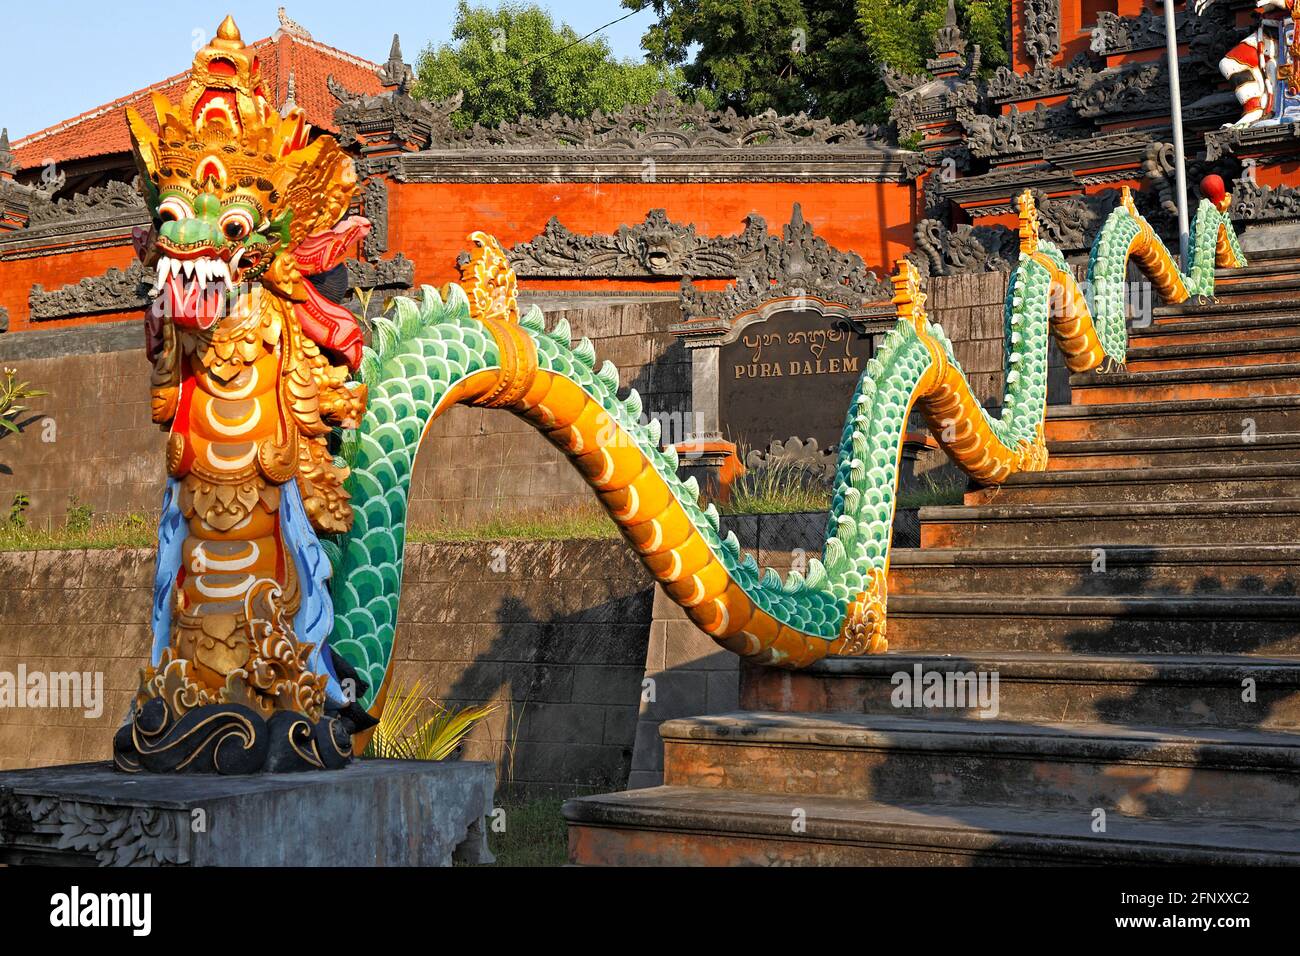 Stone Dragon stairway at the entrance to Pura Dalem Temple at Dencarik, located between Lovina and Singaraja in the north of Bali. Indonesia Stock Photo